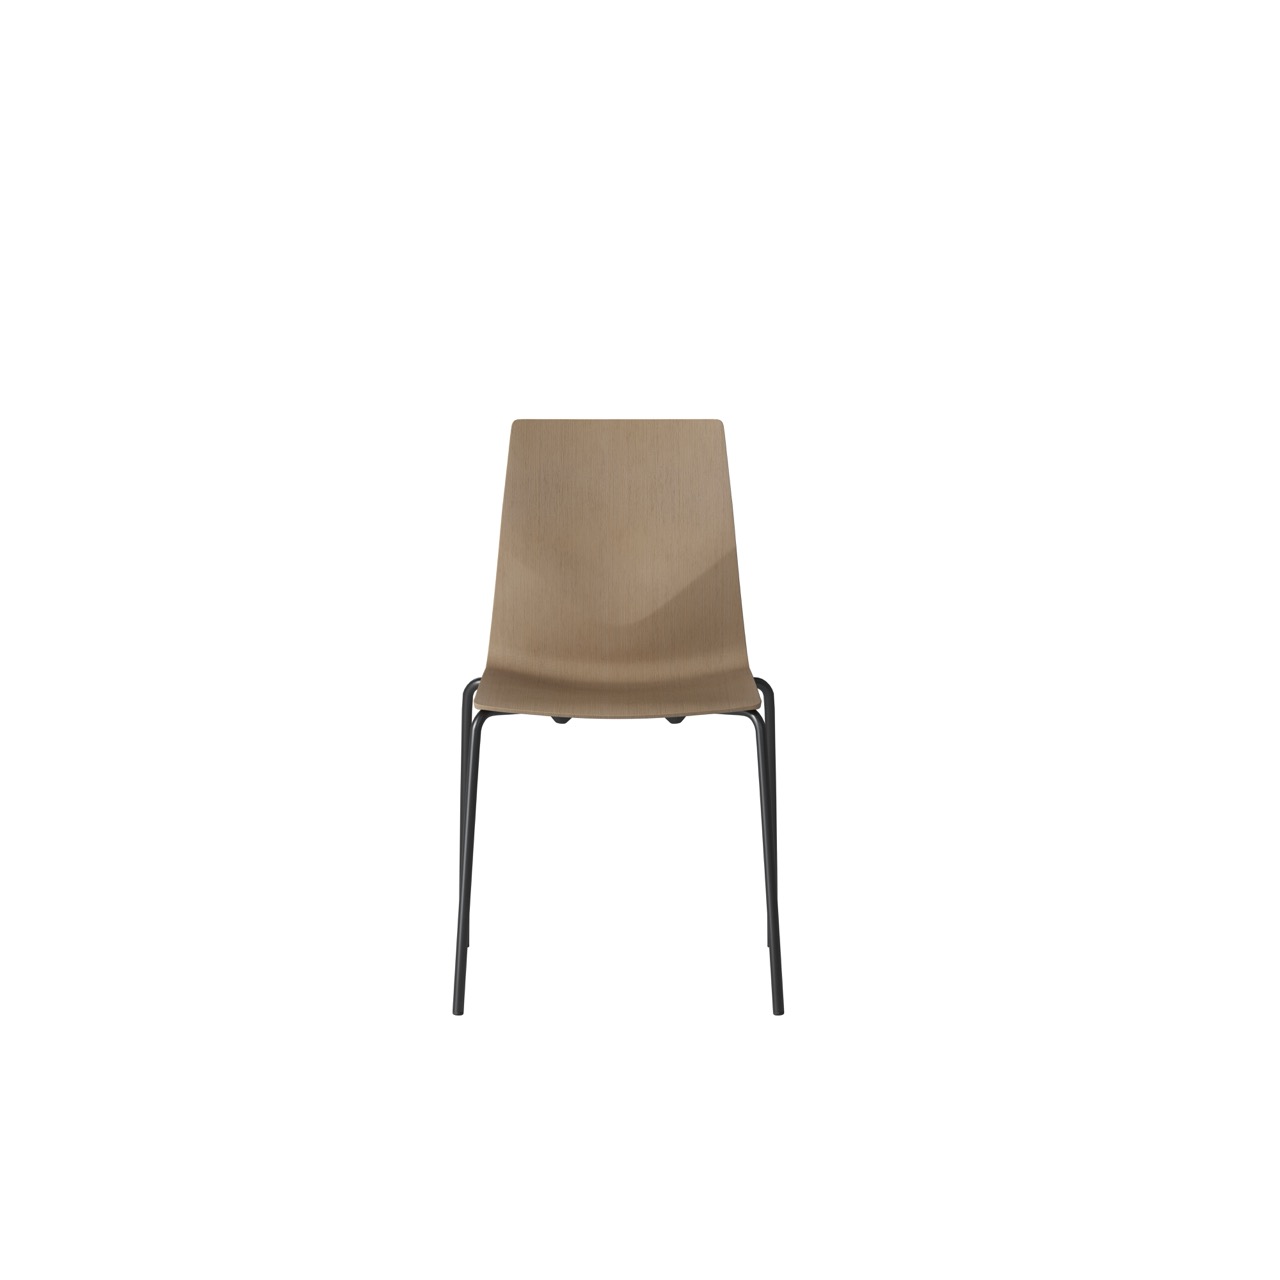 OCEE&FOUR – Chairs – FourCast 2 Four – Veneer shell - Packshot Image 5 Large